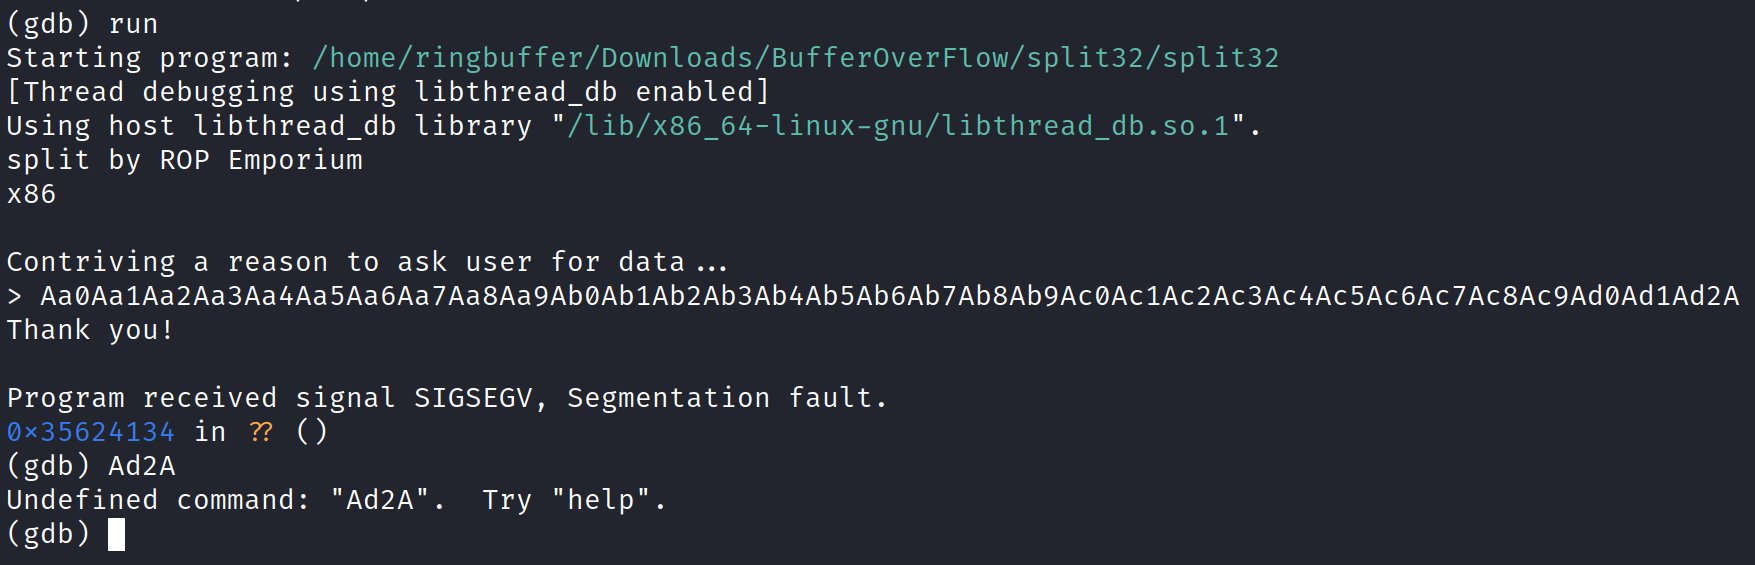 Debugging the binary for buffer overflow attacks